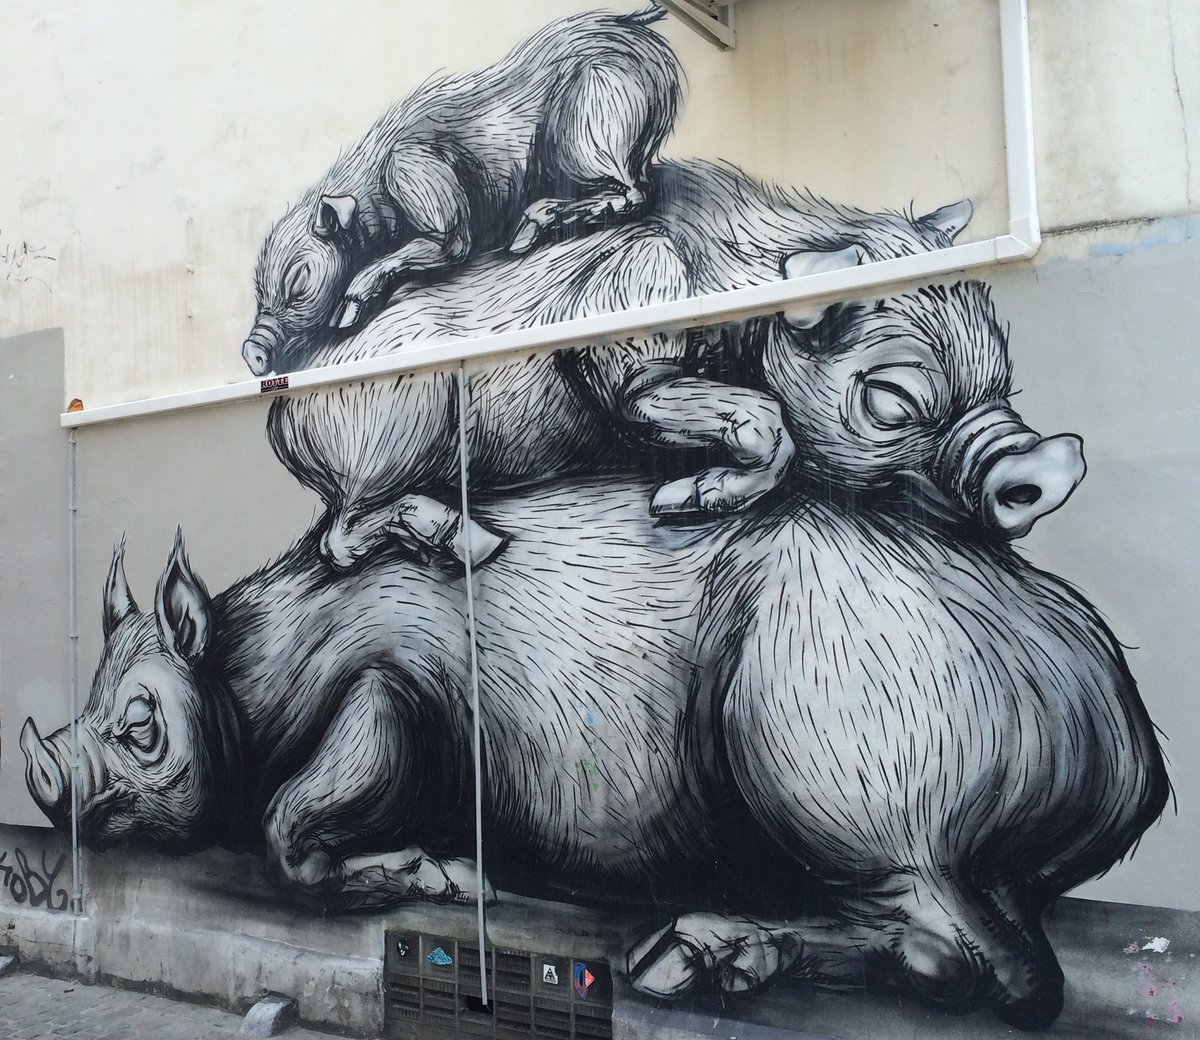 2.  #Brussels  has some amazing street art too, including by ROA